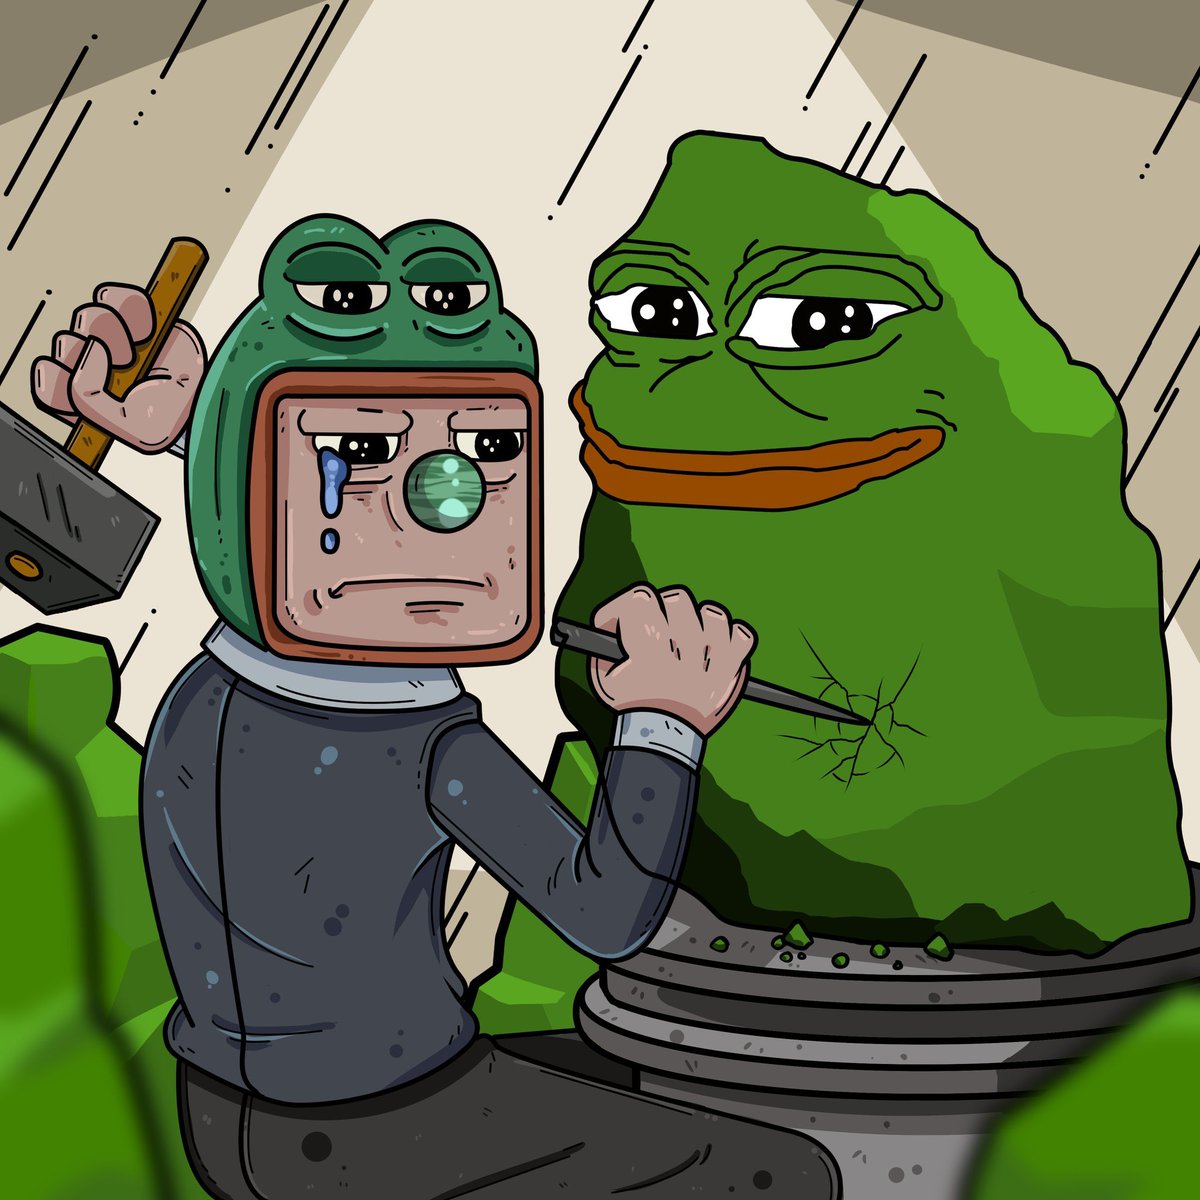 Feeling like doing a giveaway of some fine Pepe products…

Up for grabs is 2 PepeRocks on ETH from @peperockseth 

And 10,000 $Pepe from @SolanaPepecoin 

To enter:

- Add me
- RT
- Like
- Tag 2 friends and add SOL and ETH wallets.

Also turn on notifs if you are a PepeRocks…